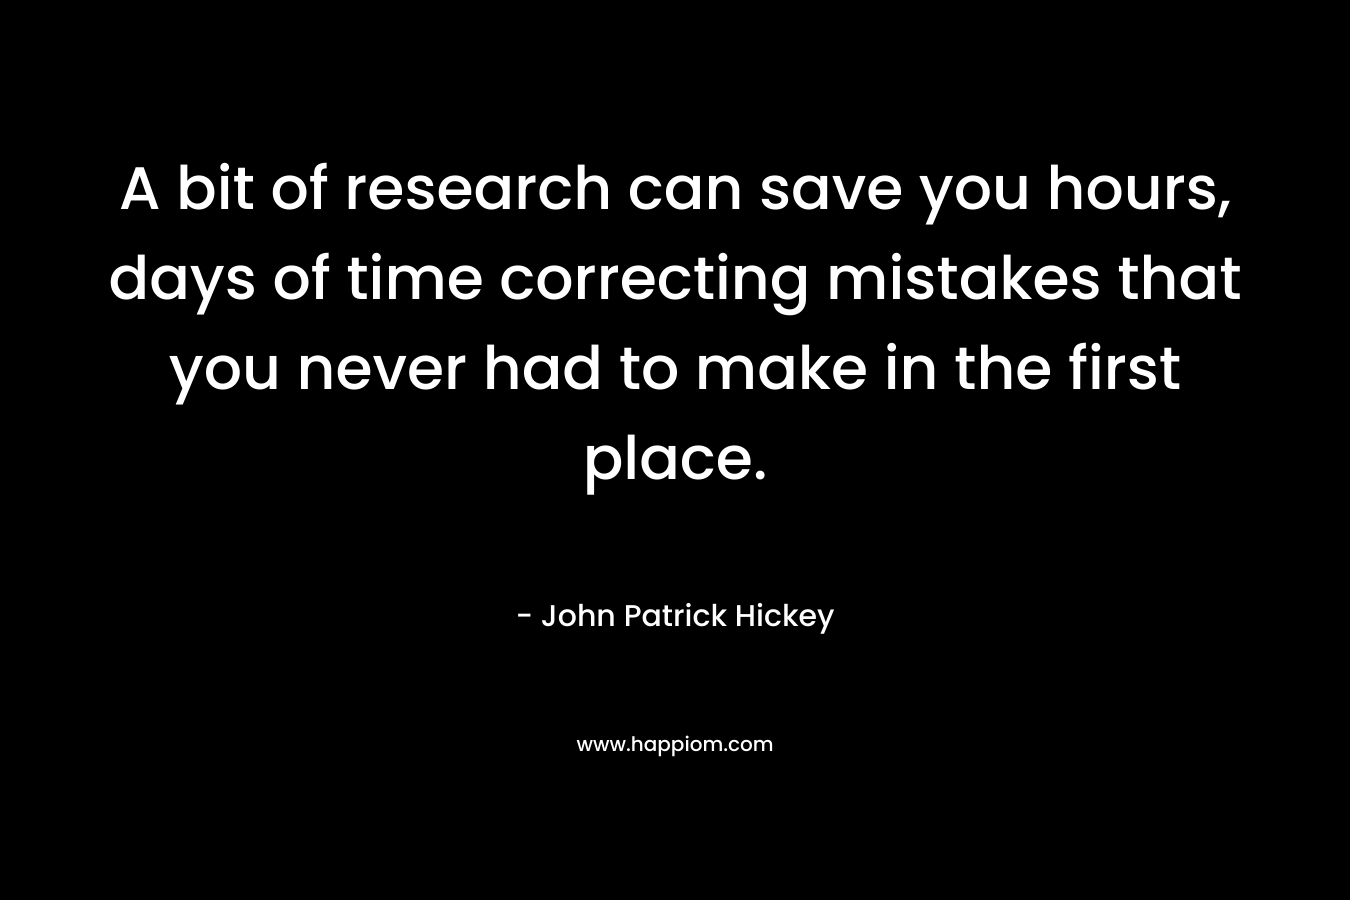 A bit of research can save you hours, days of time correcting mistakes that you never had to make in the first place.